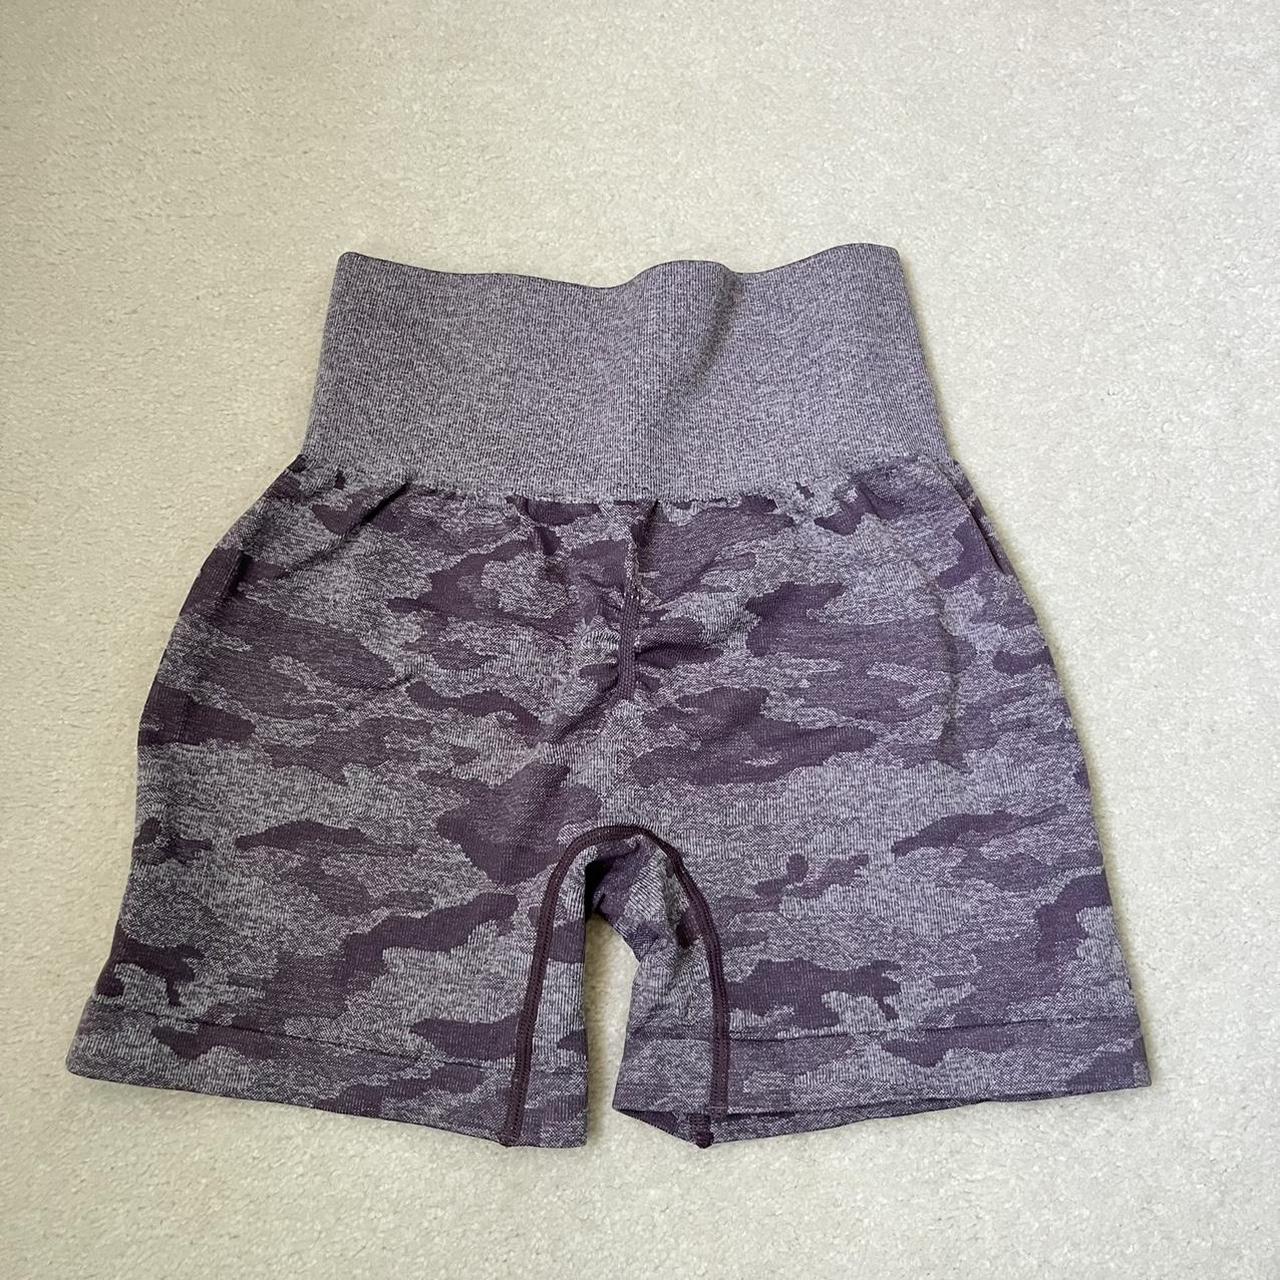 YEOREO Booty Scrunch Workout Shorts These purple... - Depop